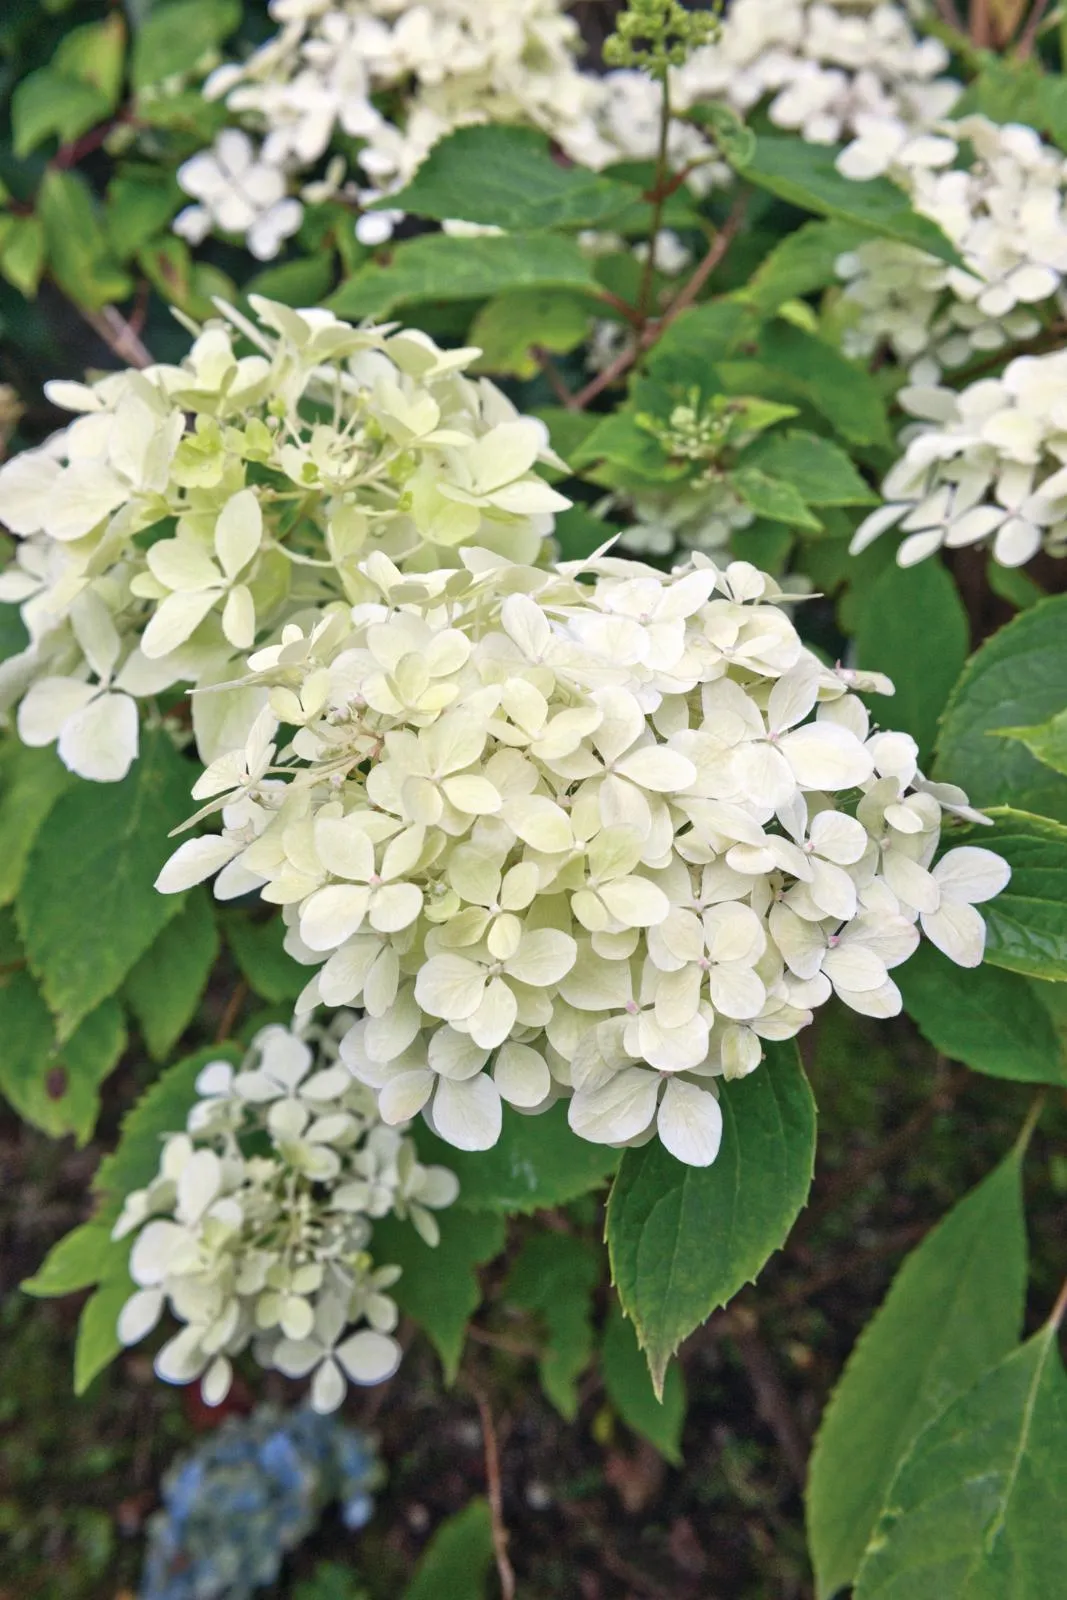 Hydrangea paniculata ‘Phantom’ is strong with upright stems bearing large heads of mostly white, sterile florets.